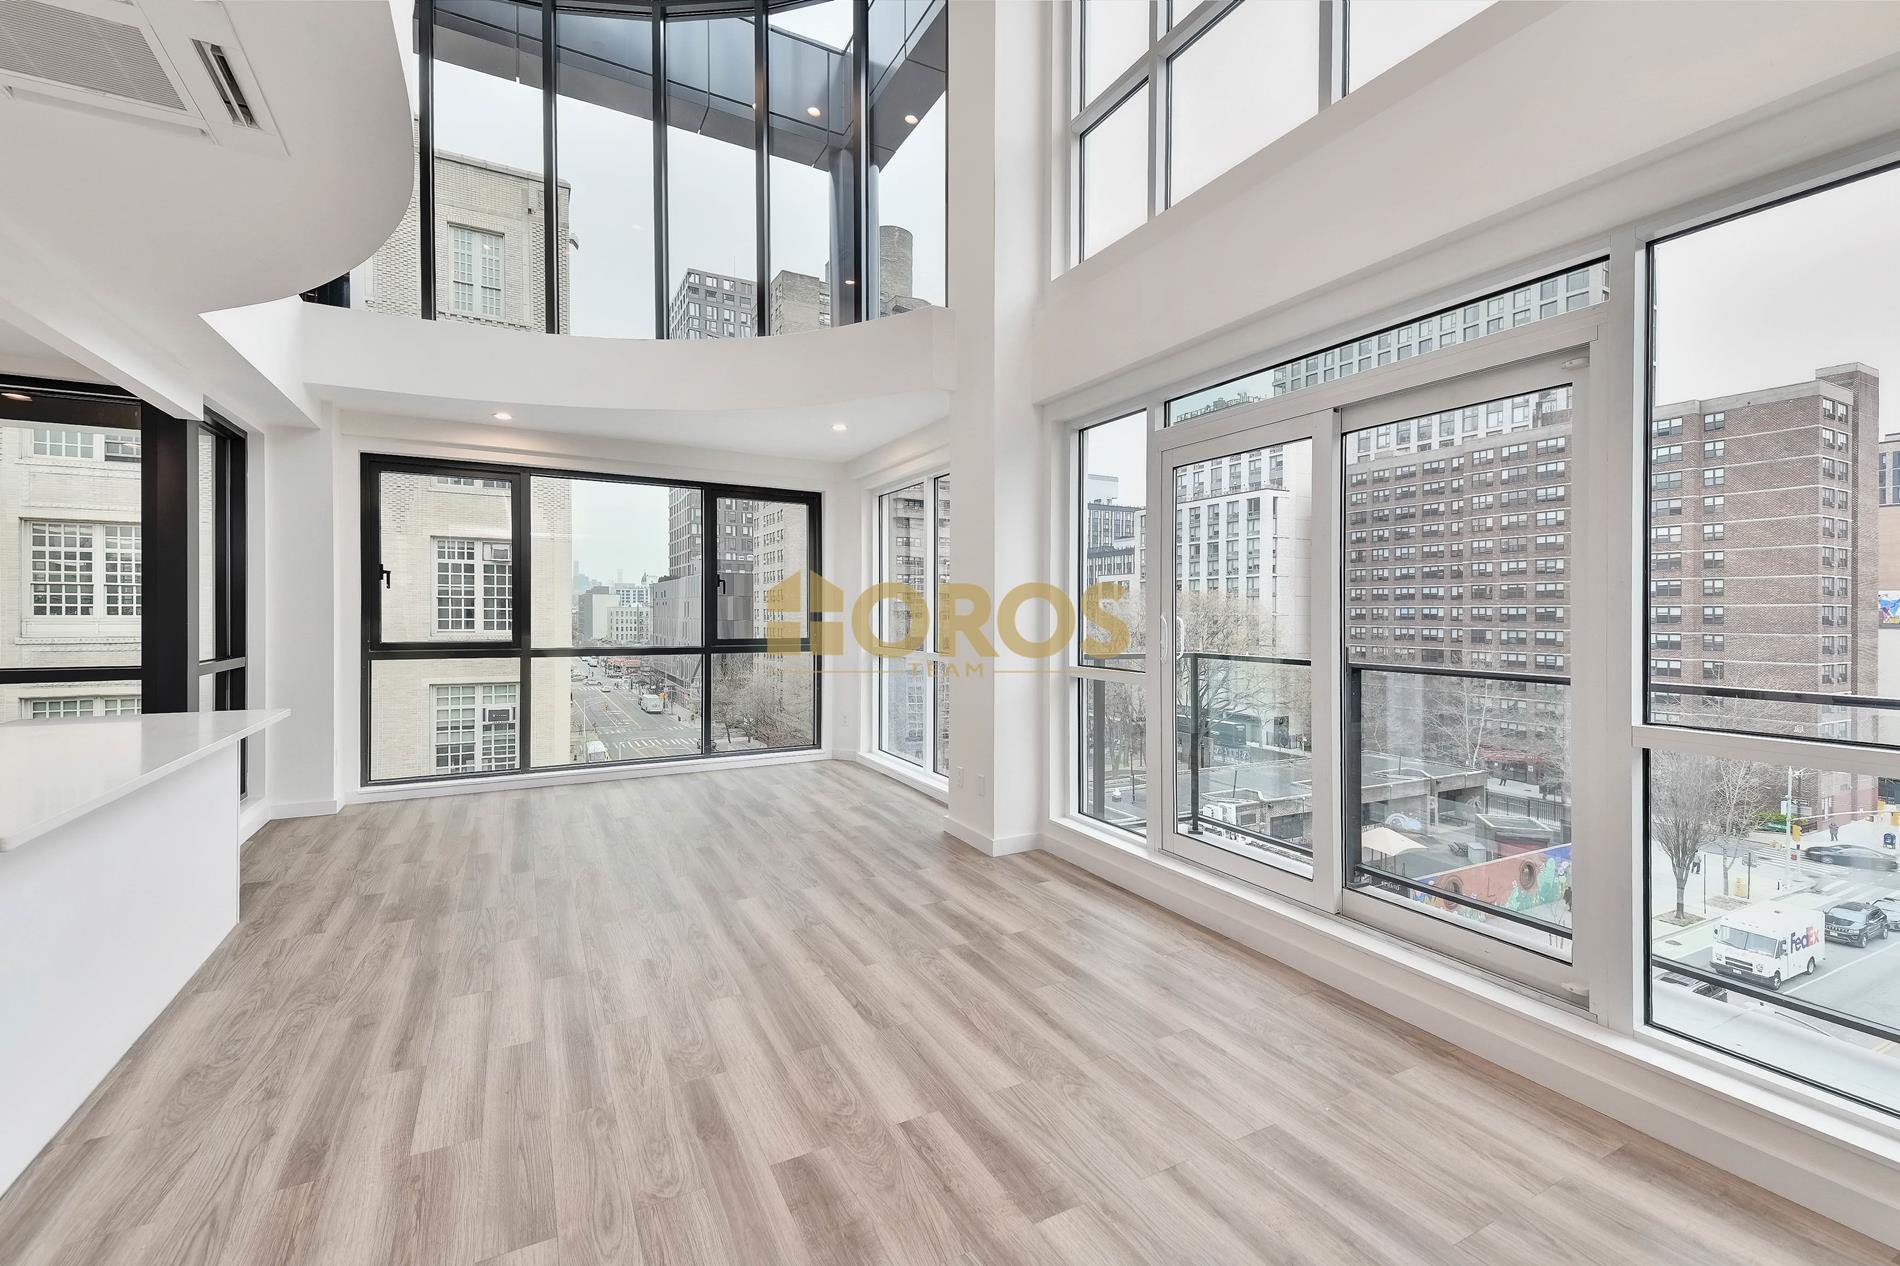 355 Grand Street 6, Chinatown, Downtown, NYC - 3 Bedrooms  
2.5 Bathrooms  
5 Rooms - 